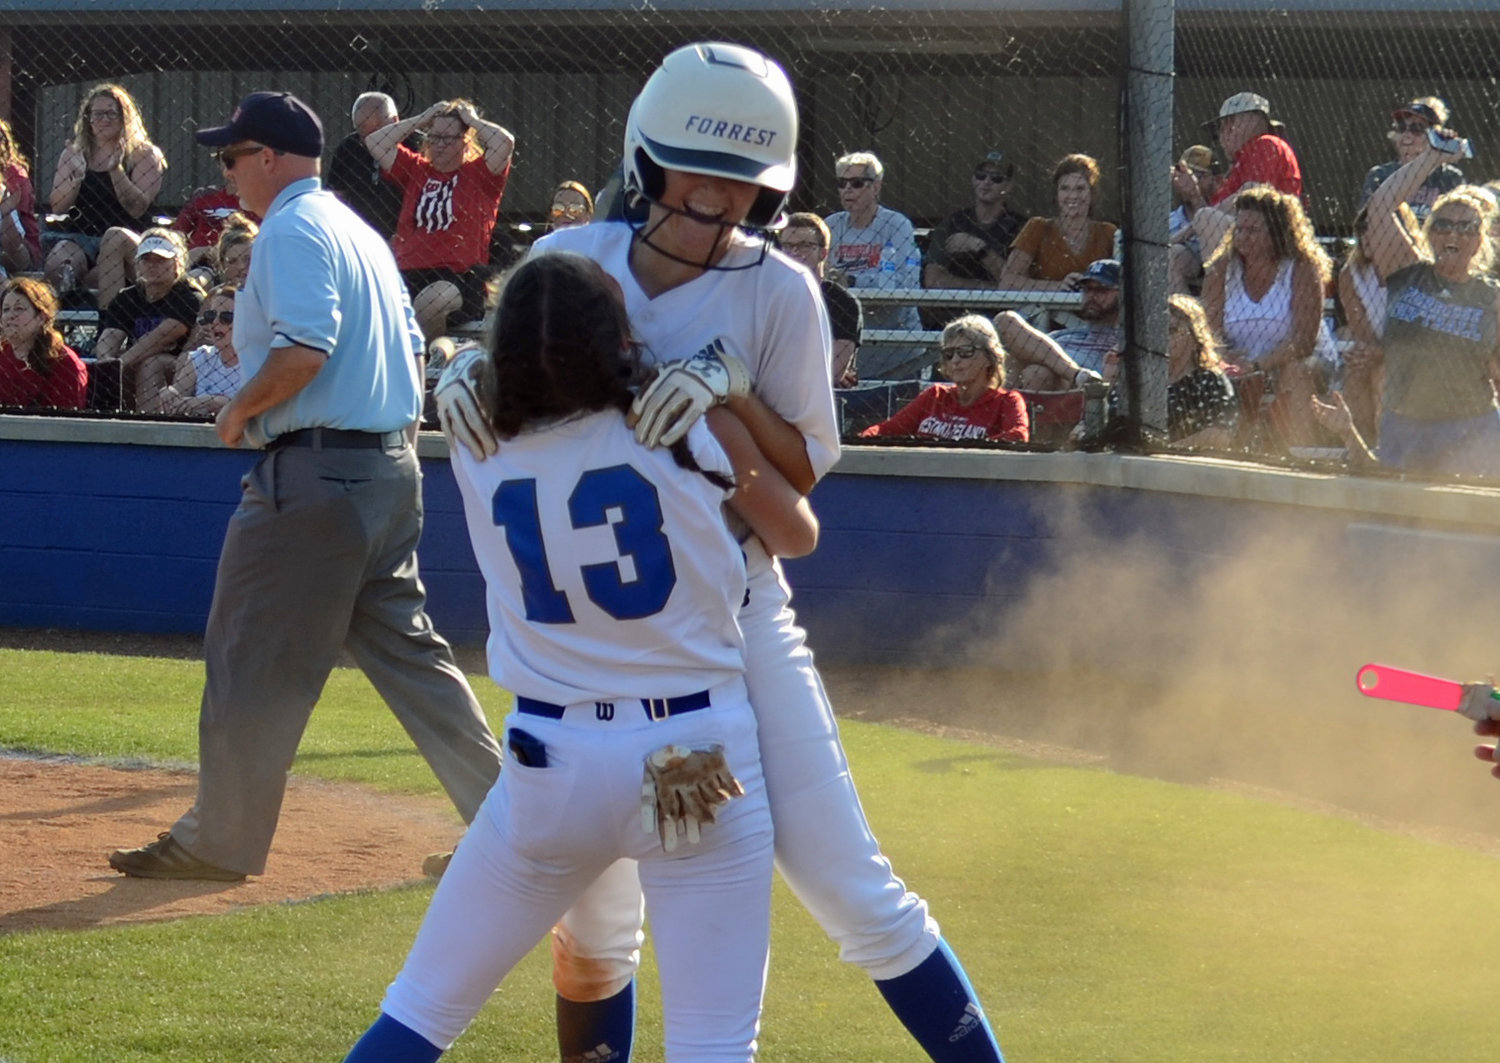 Addi Bunty lifts Maggie Daughrity off the ground after Daughrity’s inside the park homerun in the third inning.